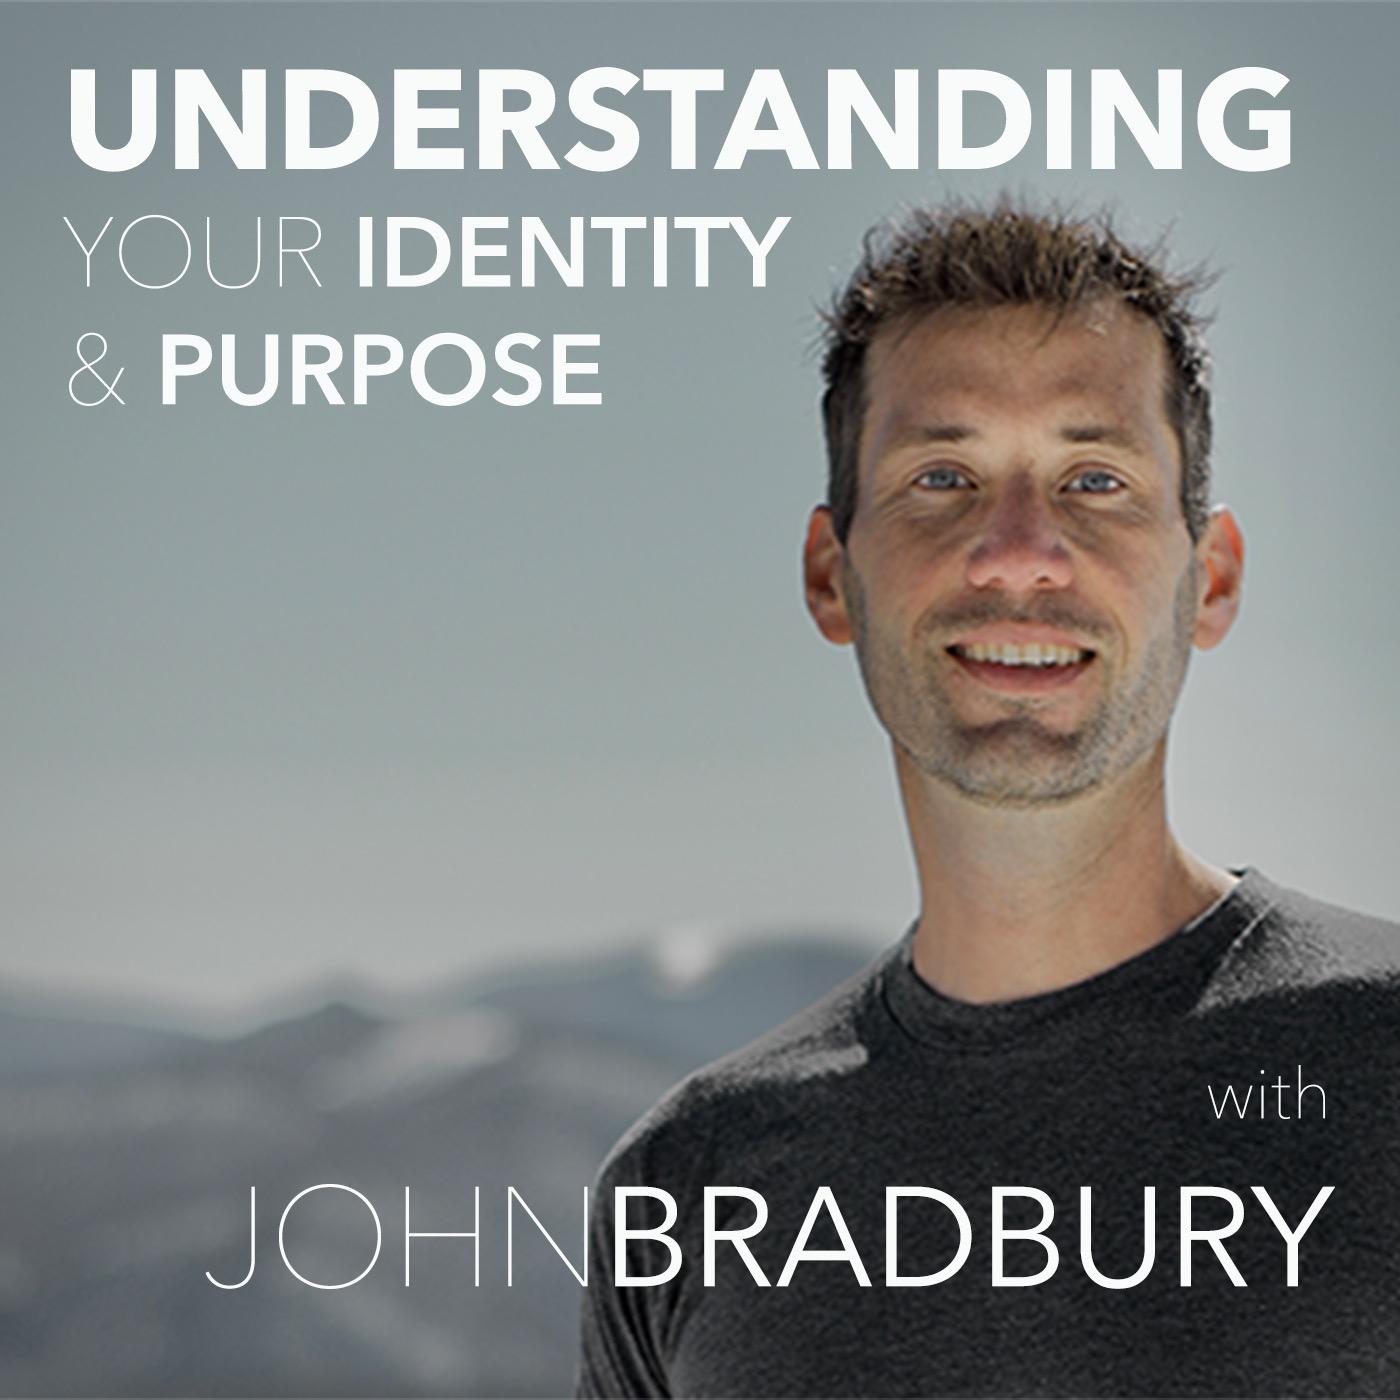 UNDERSTANDING YOUR IDENTITY AND PURPOSE